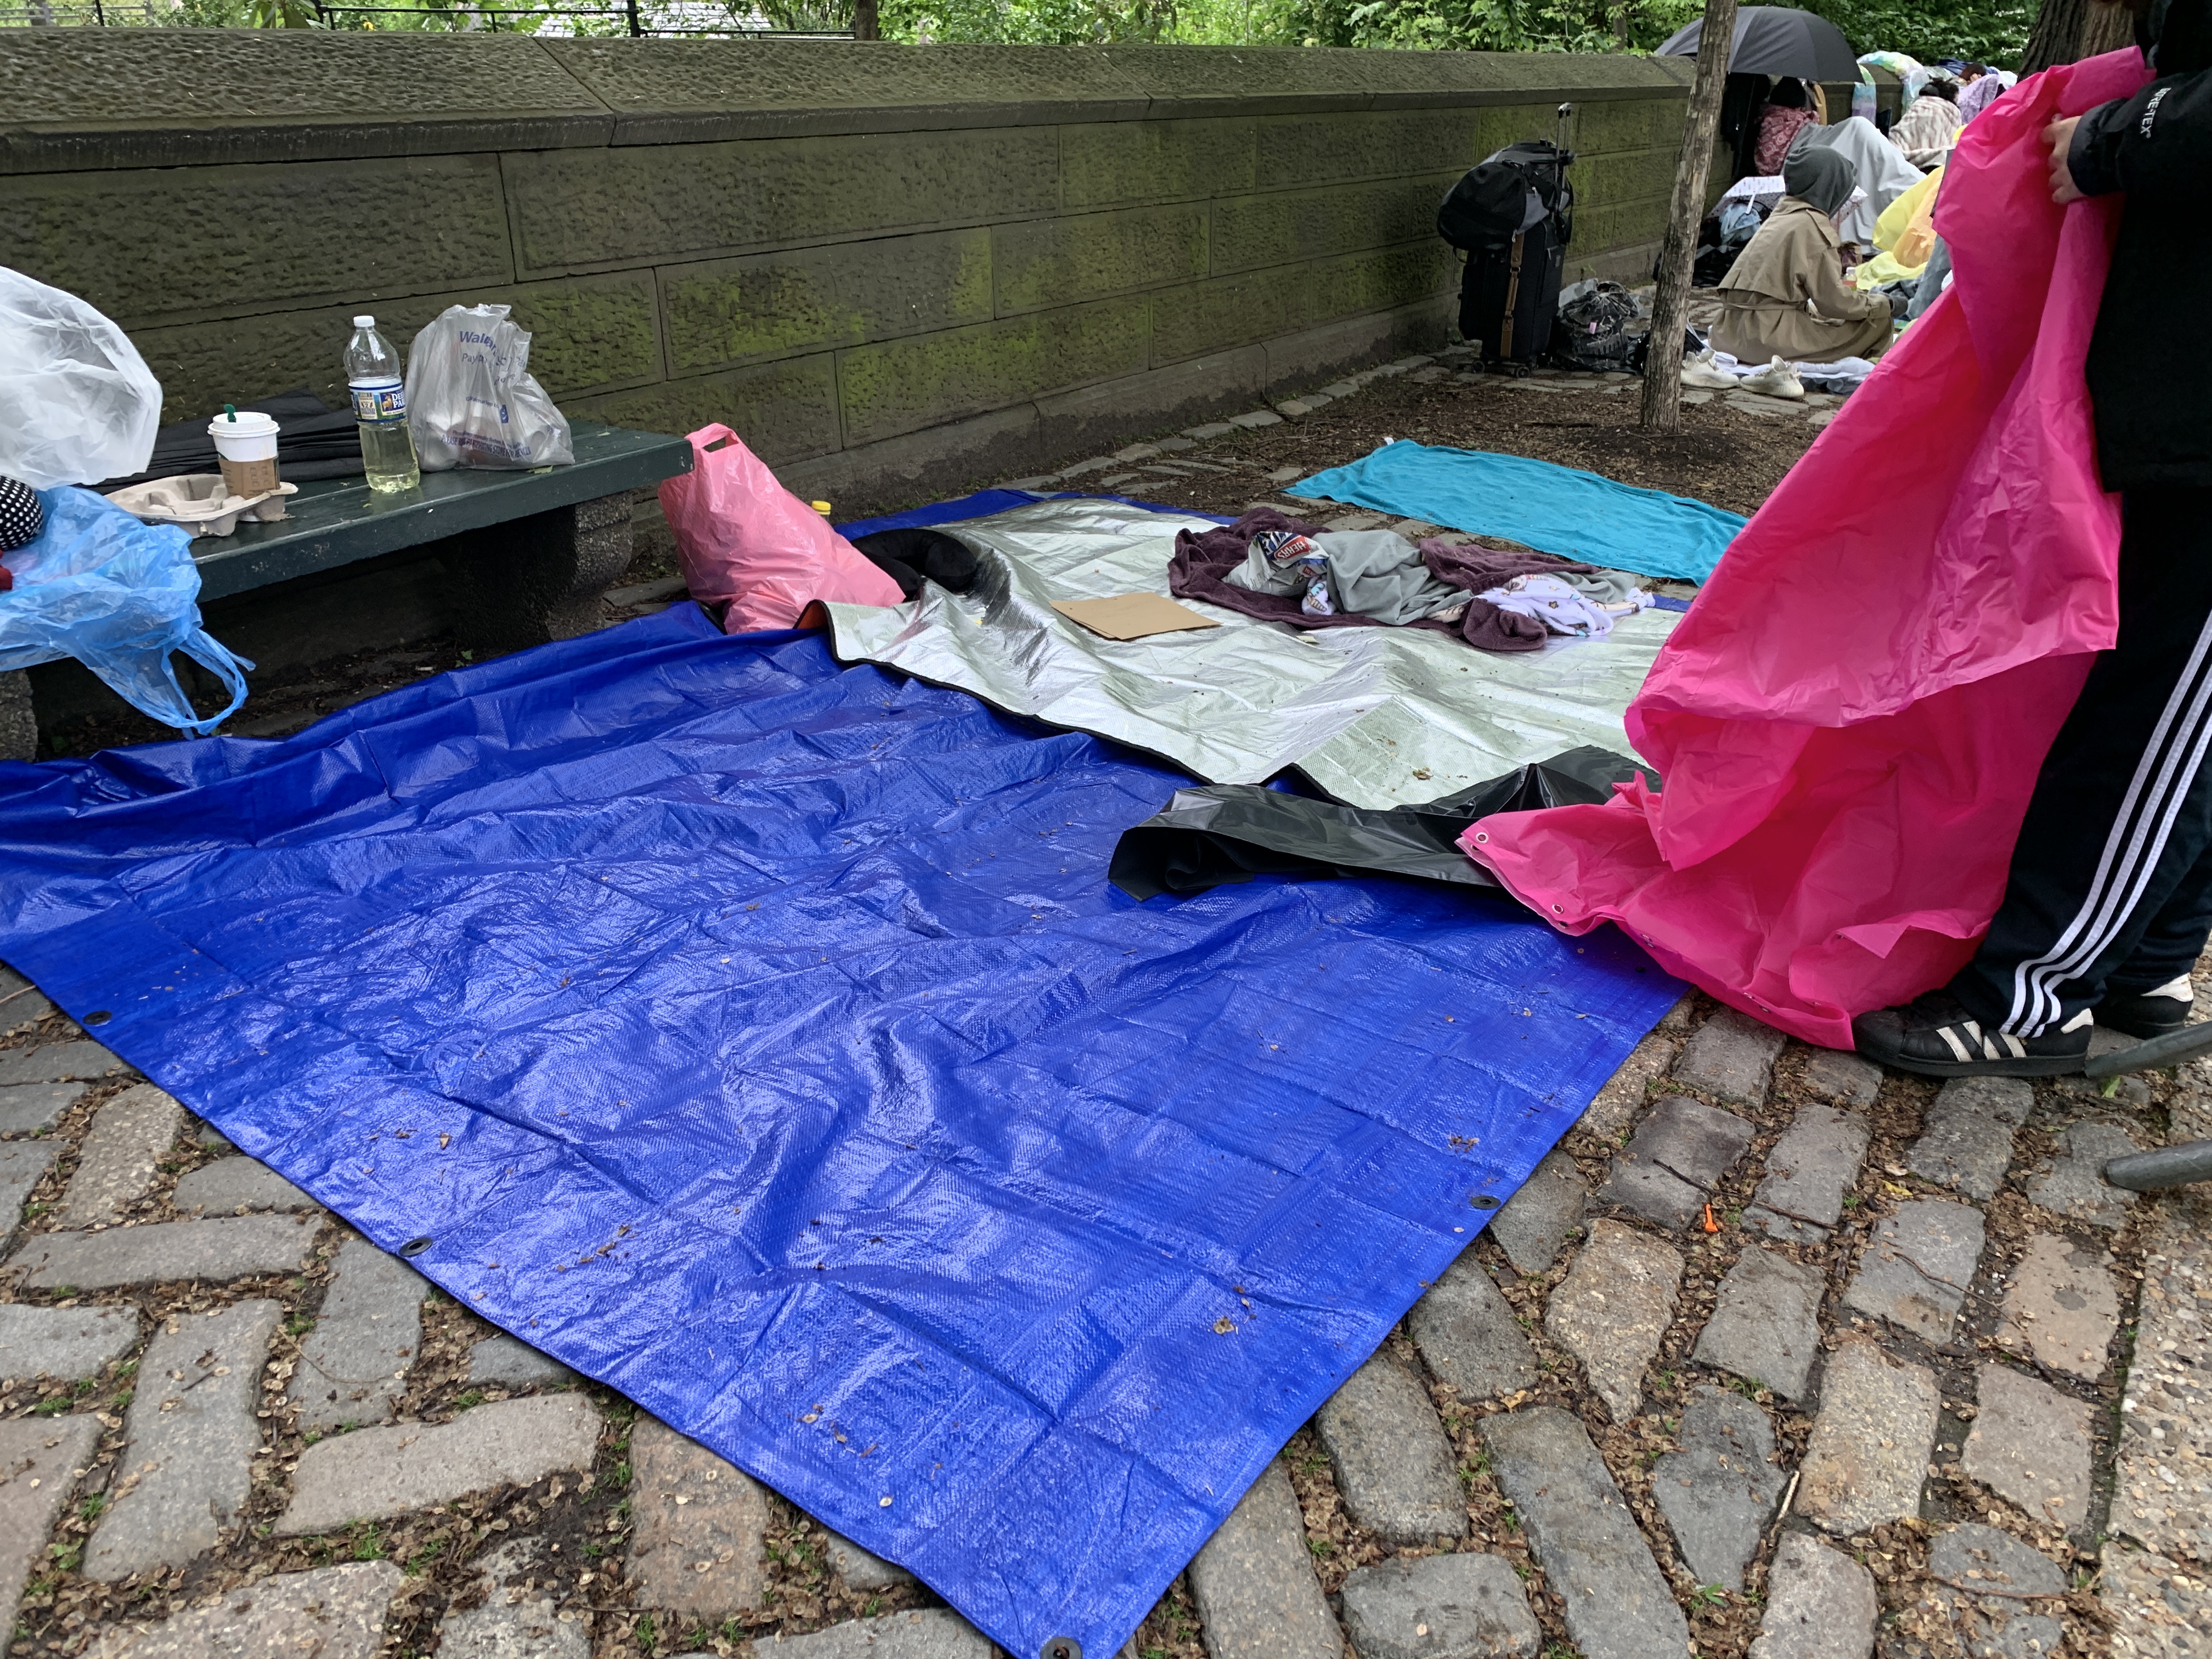 Throngs of BTS fans camp out days before Jungkook concert in Central Park